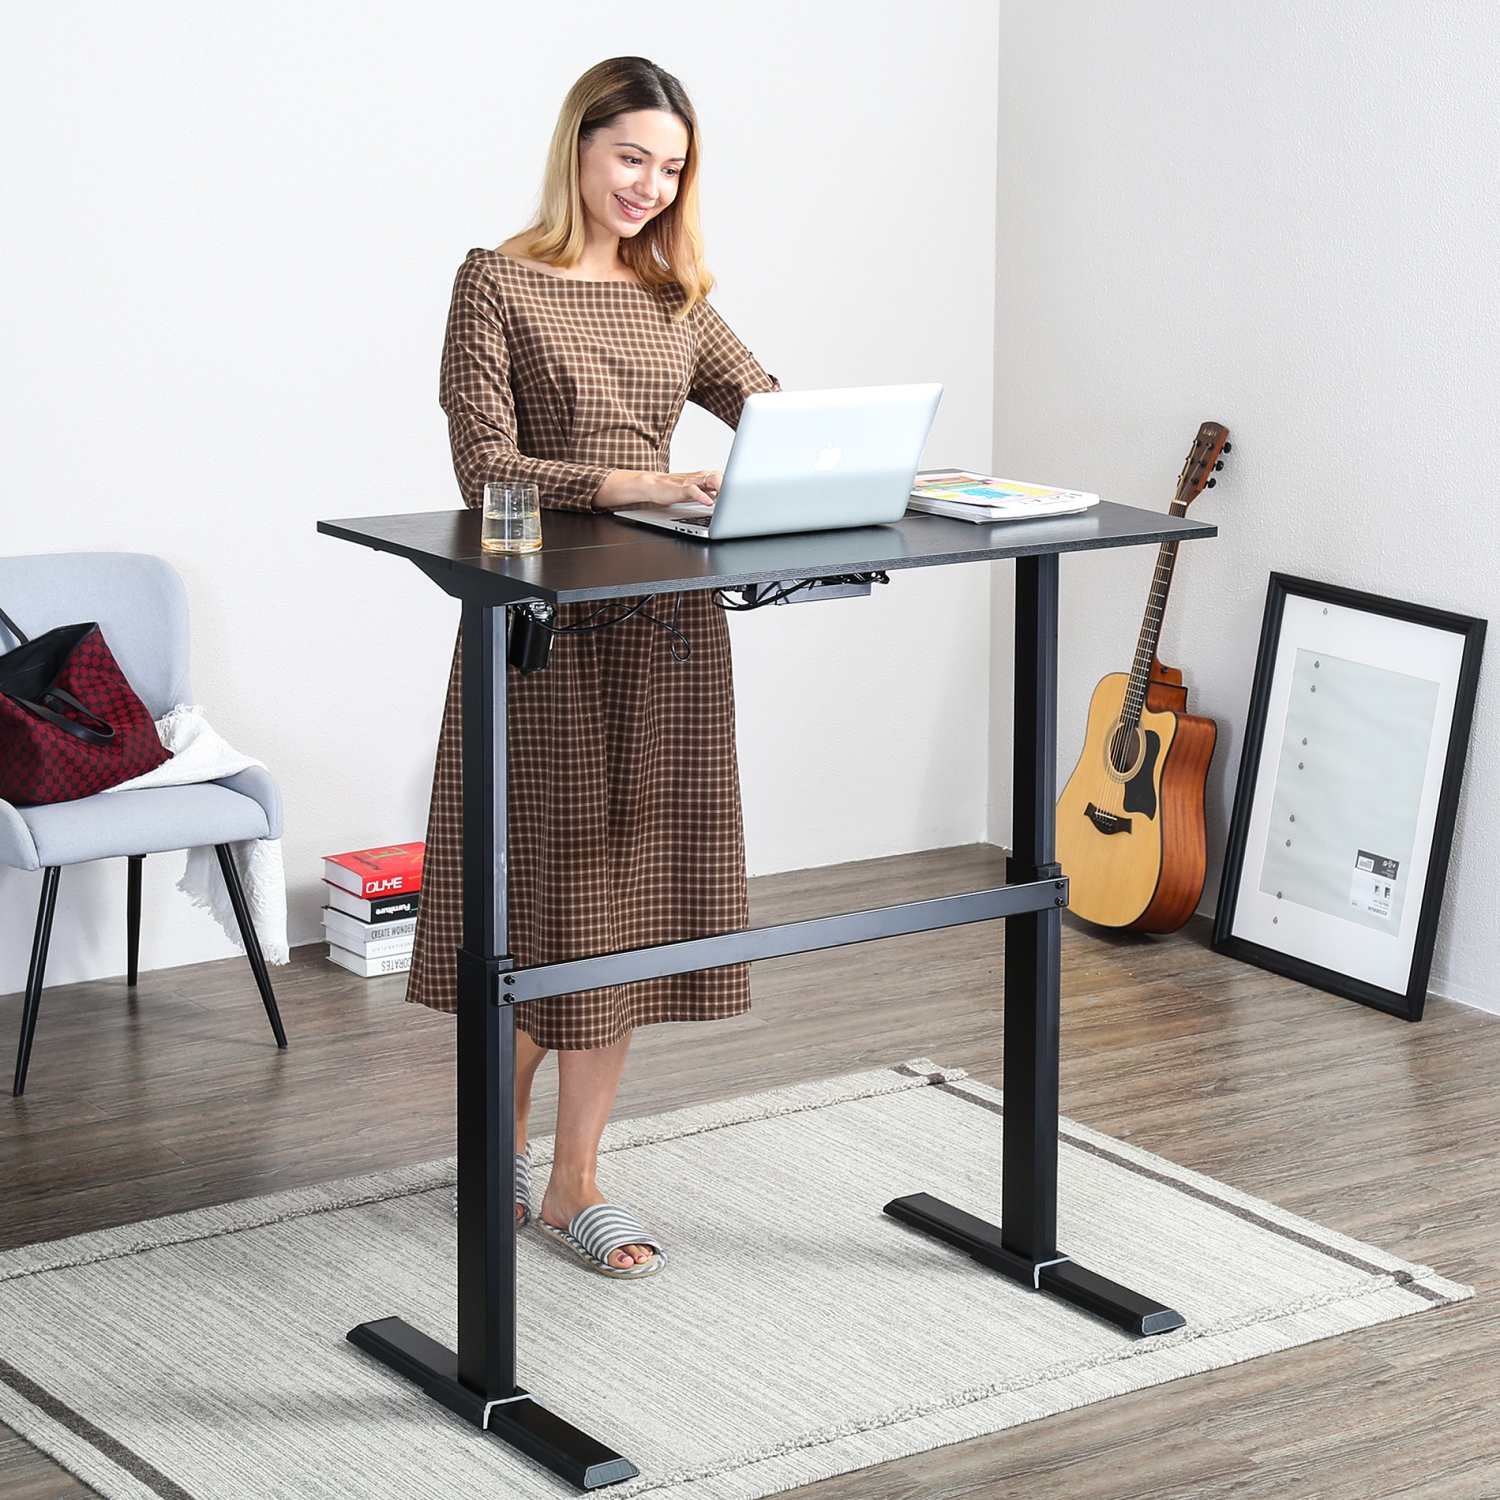 FENGE Electric Height Adjustable Standing Desk 43x24 Inches Adjustable Stand Up Desk Home Office Table Computer Desk Black Broad ED-S48102WE 